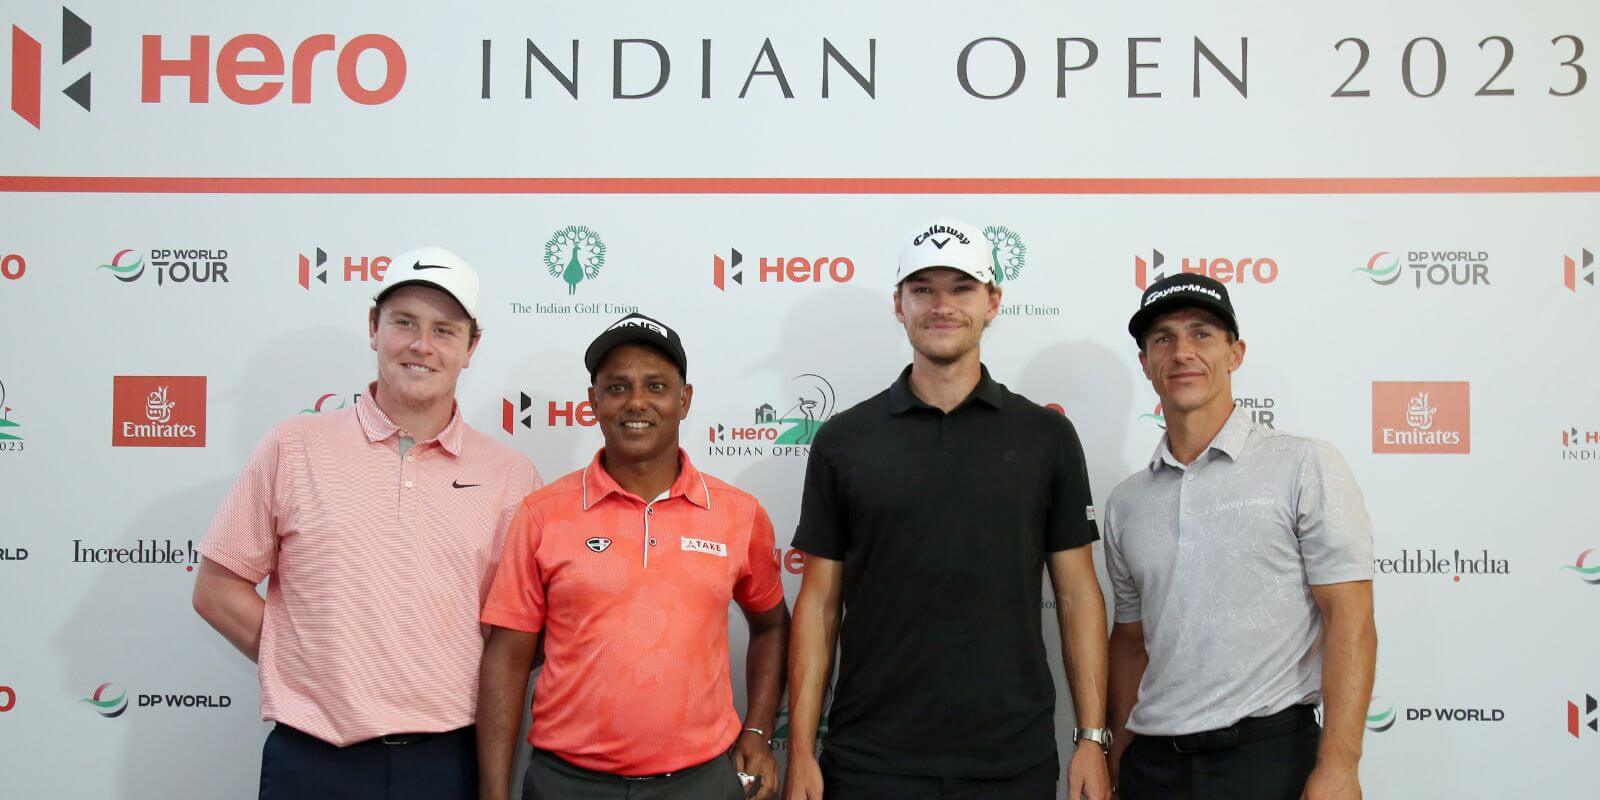 Scot MacIntyre aces 16th as Olesen, Højgaard vie to be first Danes to win Hero Indian Open